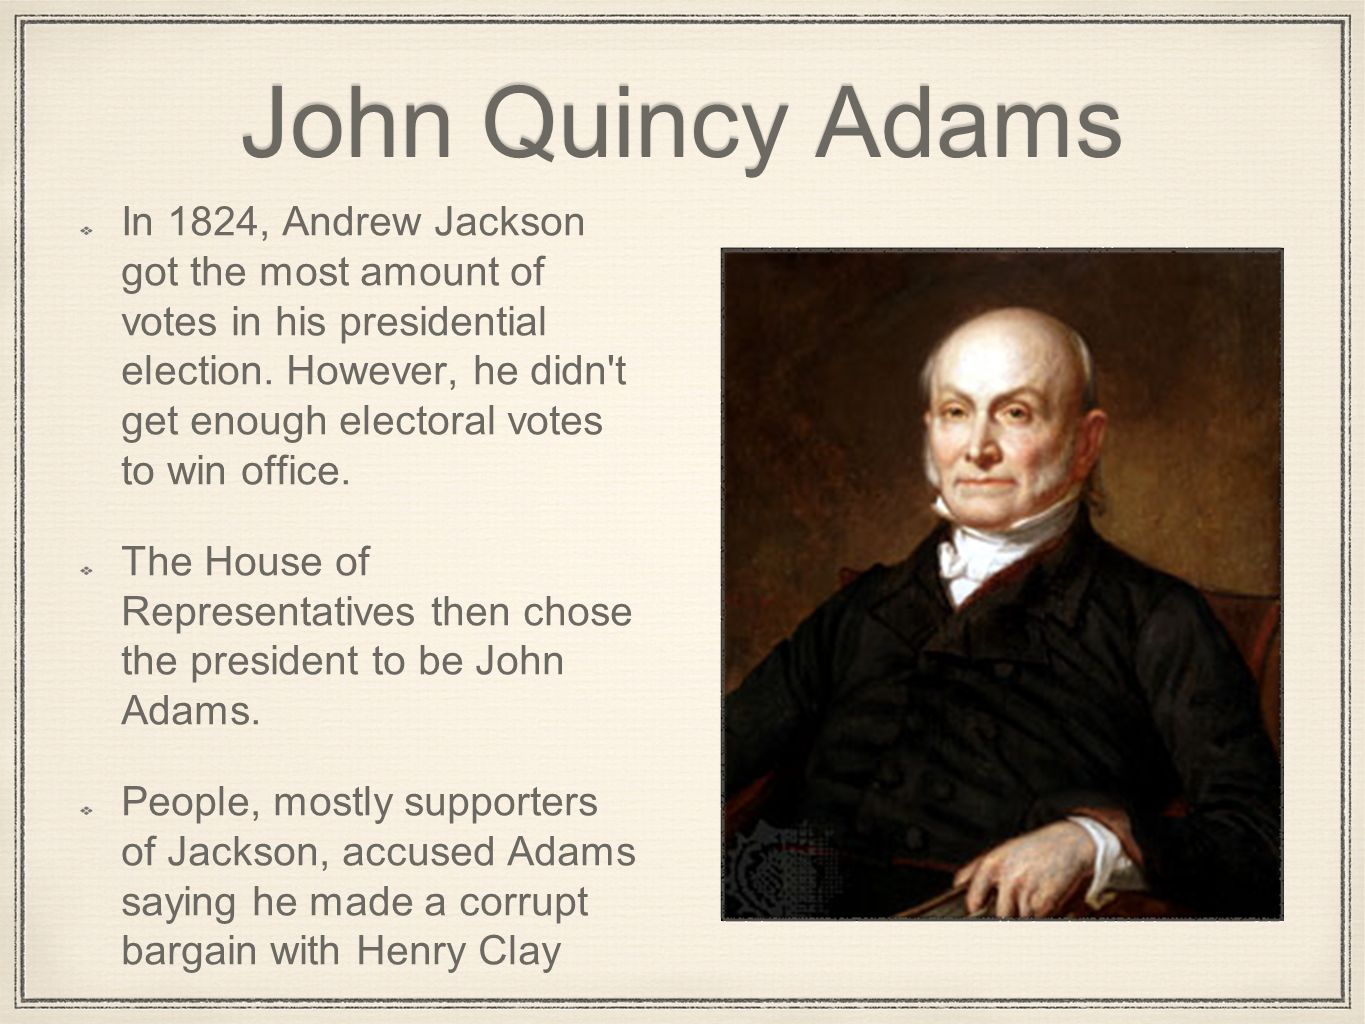 John Quincy Adams In 1824, Andrew Jackson got the most amount of votes in his presidential election.